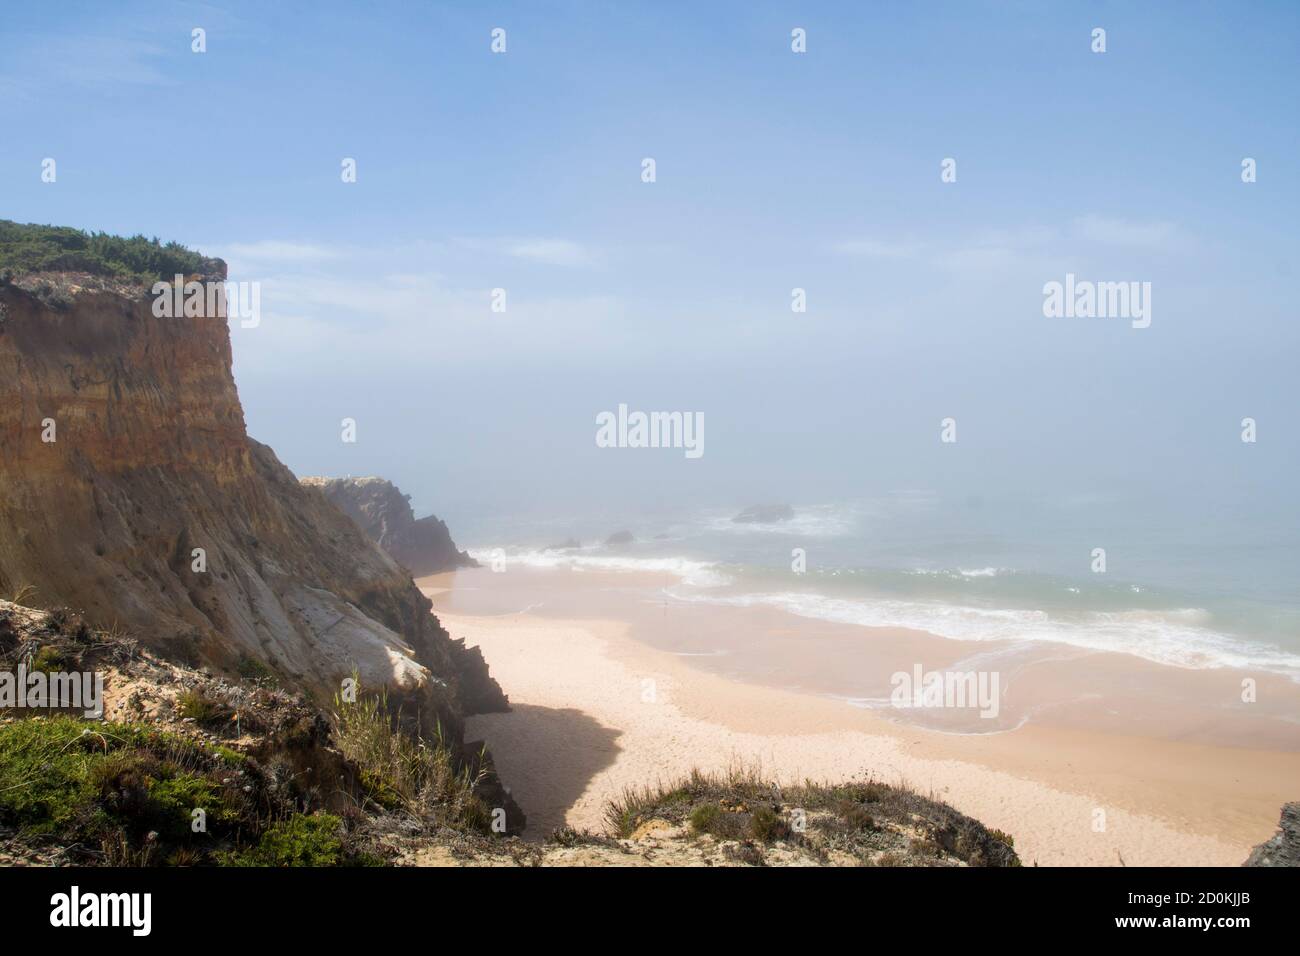 Southern europe beach, down in the middle of the cliffs, with morning fog lifting up and sun starting to shine Stock Photo